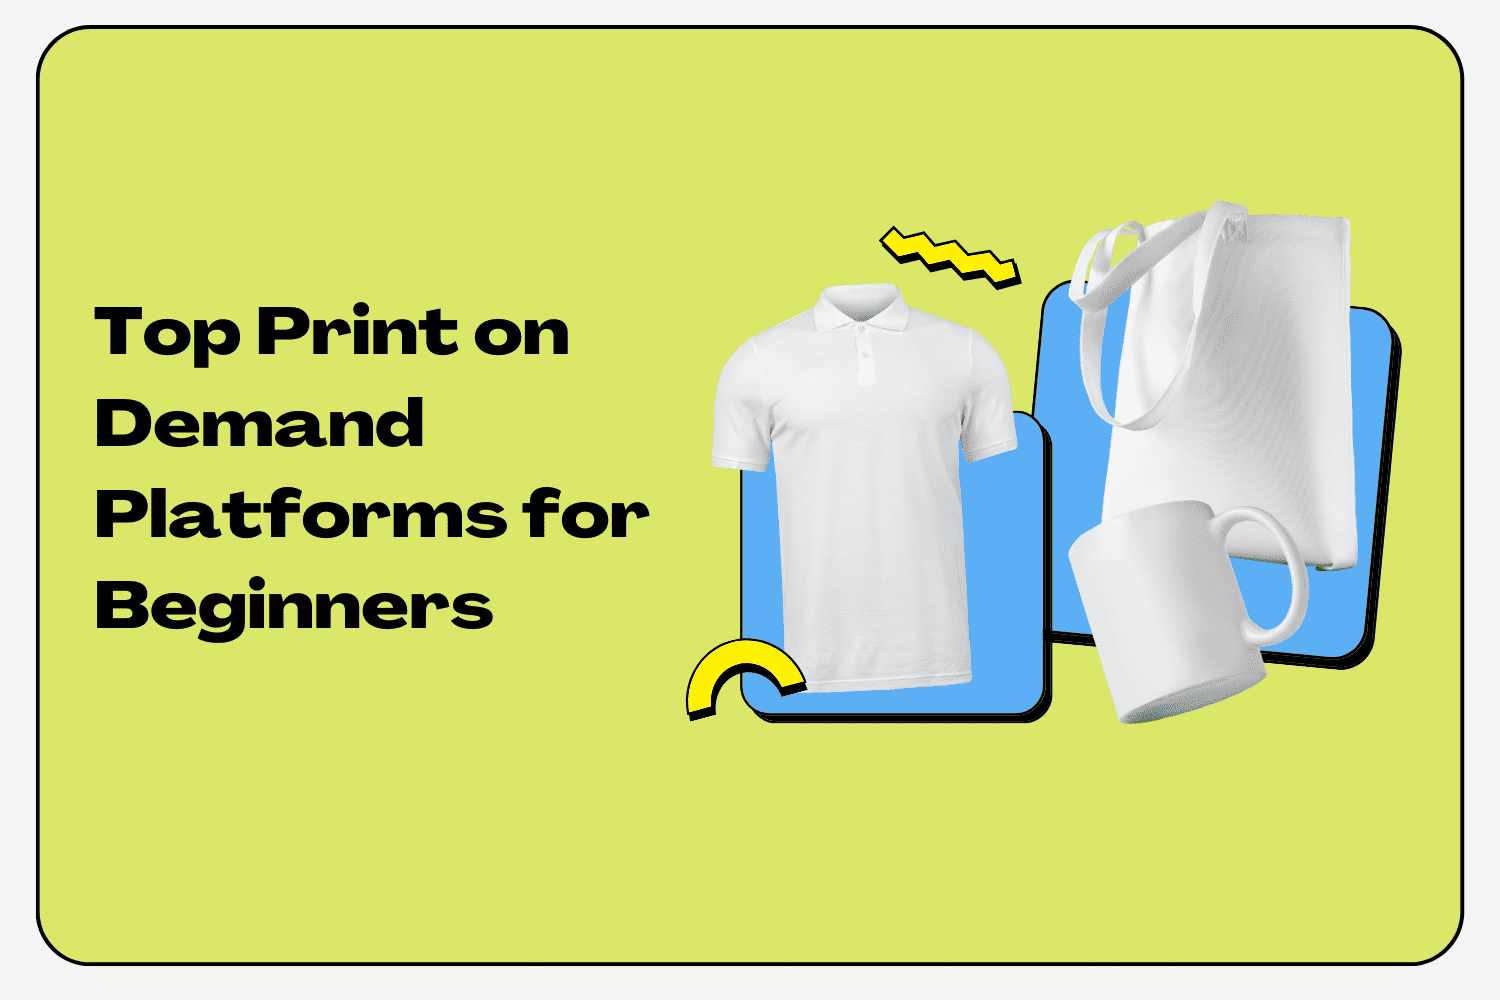 Top Print on Demand Platforms for Beginners